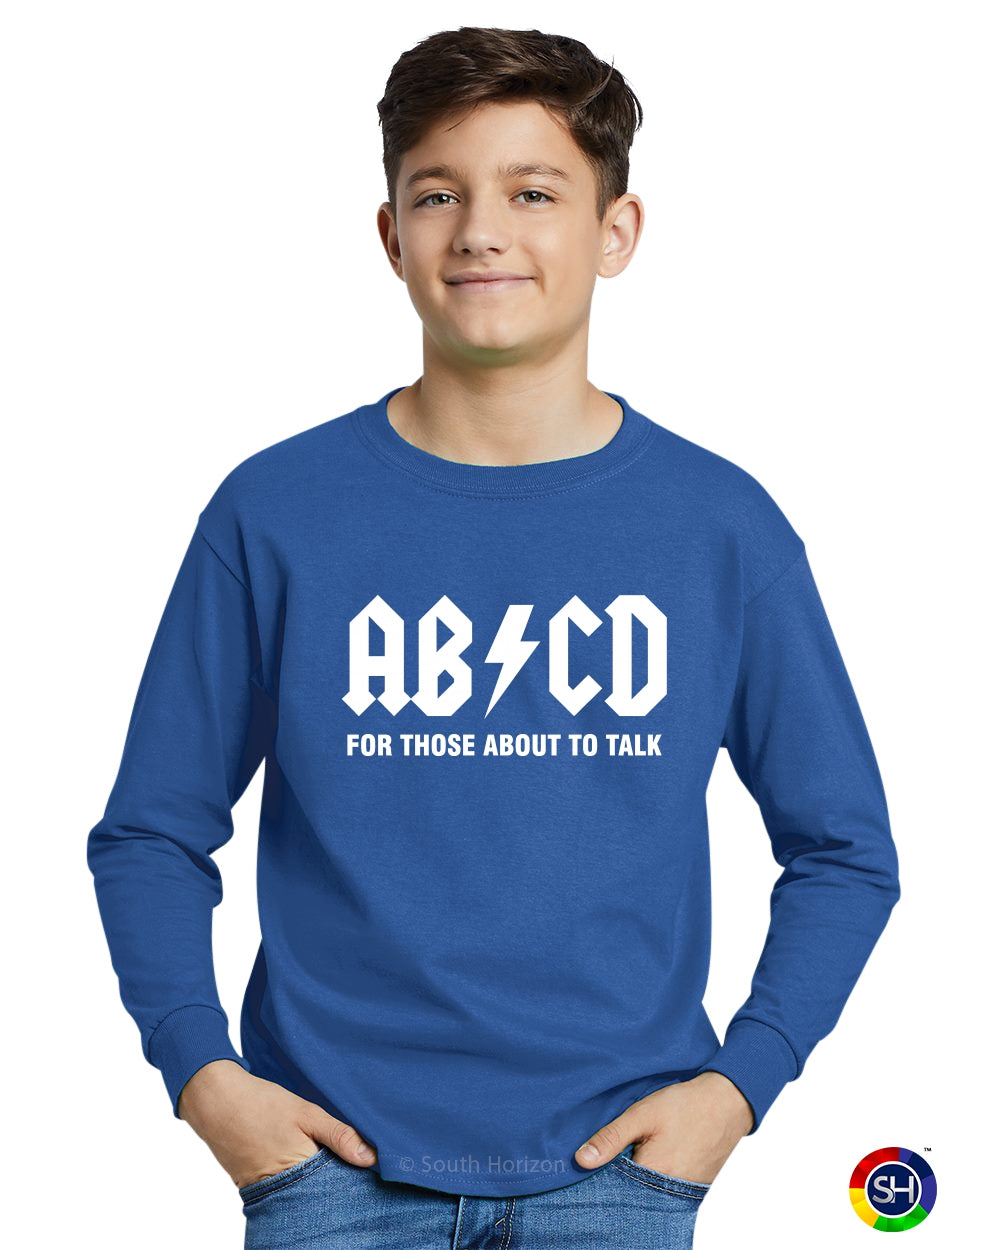 ABCD For Those About To Talk on Youth Long Sleeve Shirt